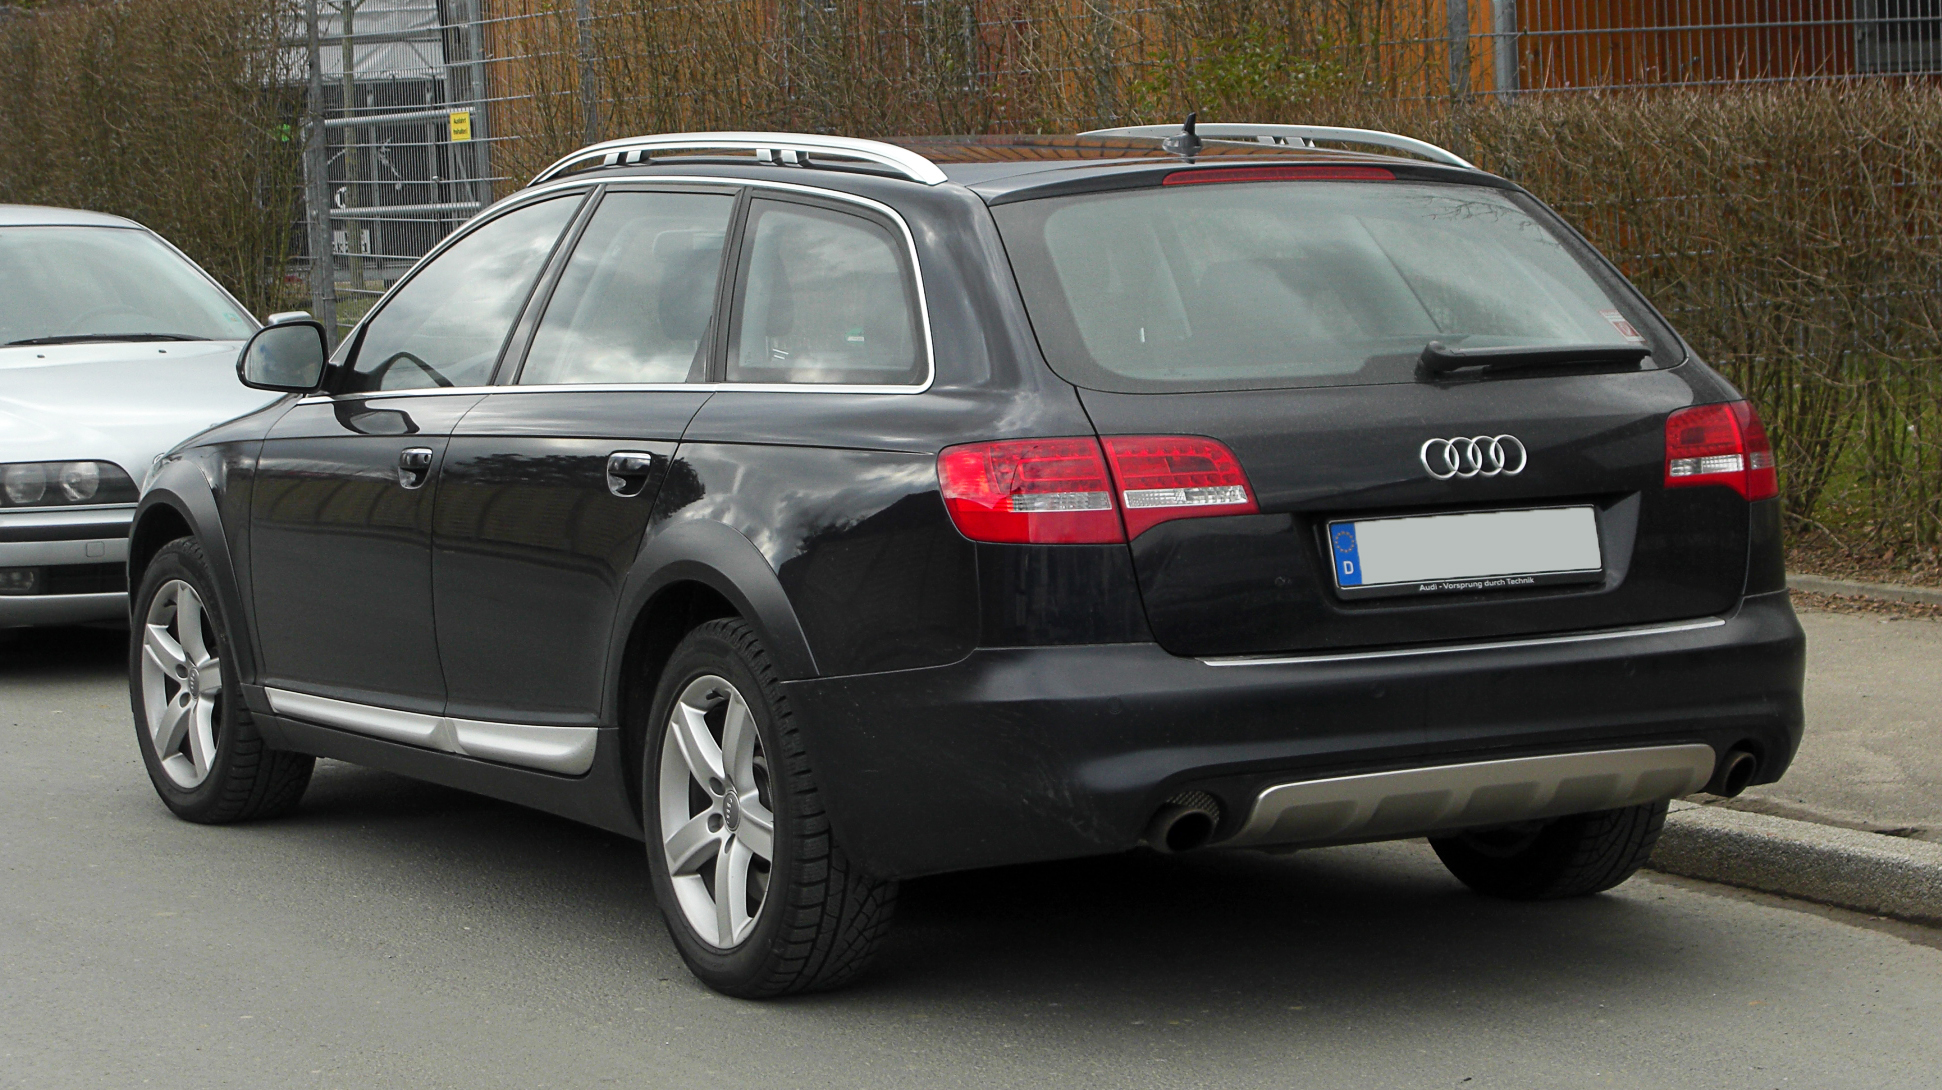 Audi A6 allroad II (C6) 2006 - 2011 Station wagon 5 door :: OUTSTANDING CARS